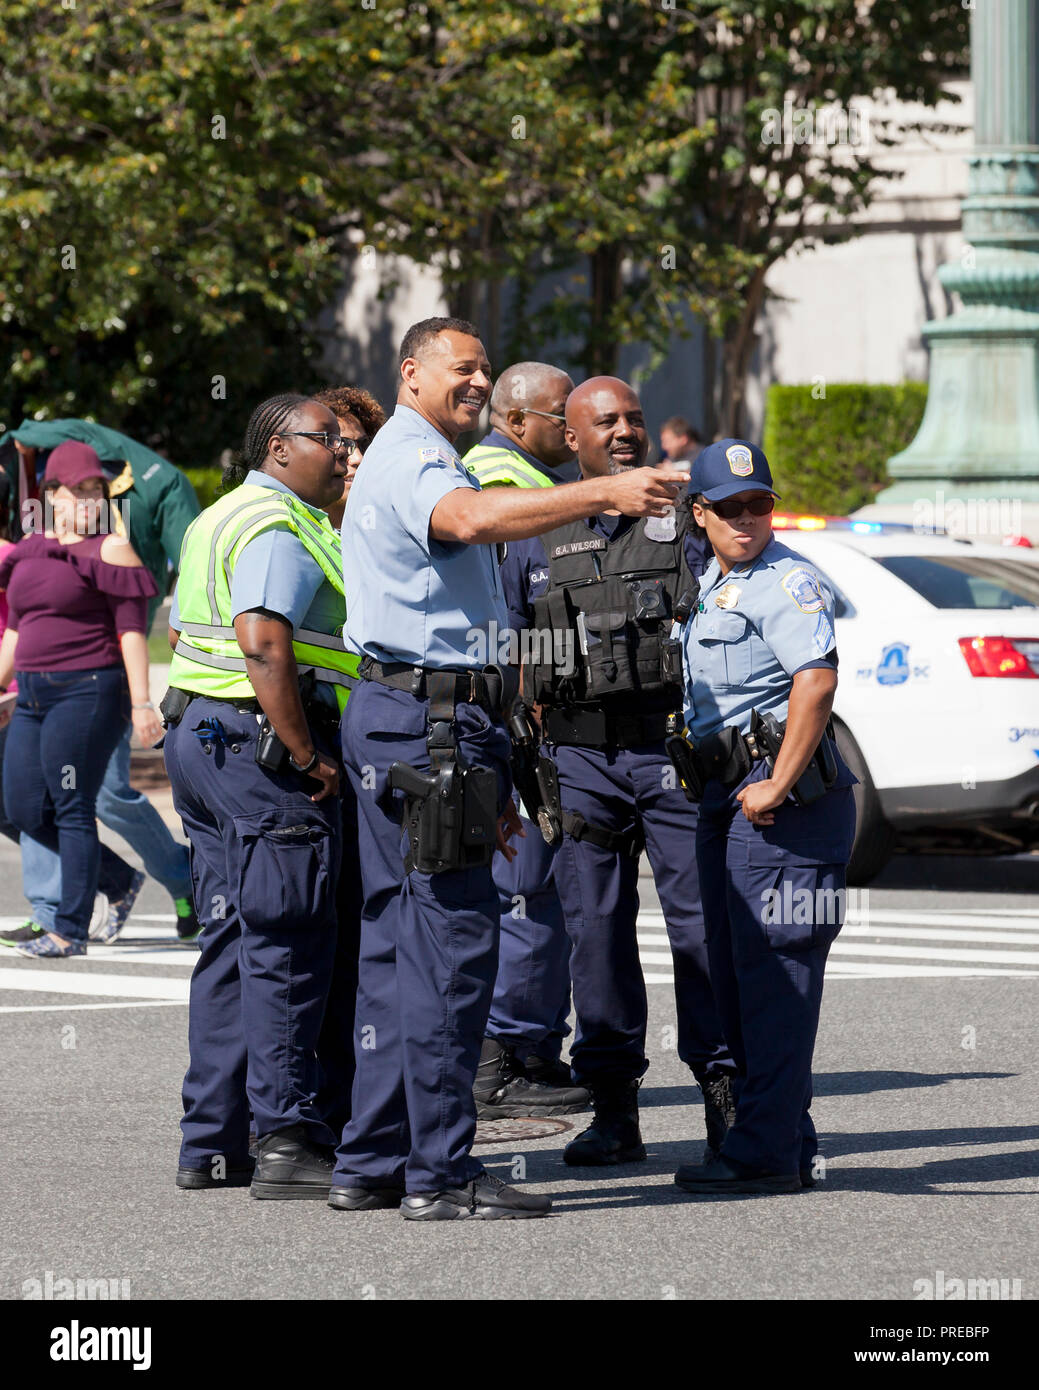 Police officers together at an outdoor event - Washington, DC USA Stock Photo